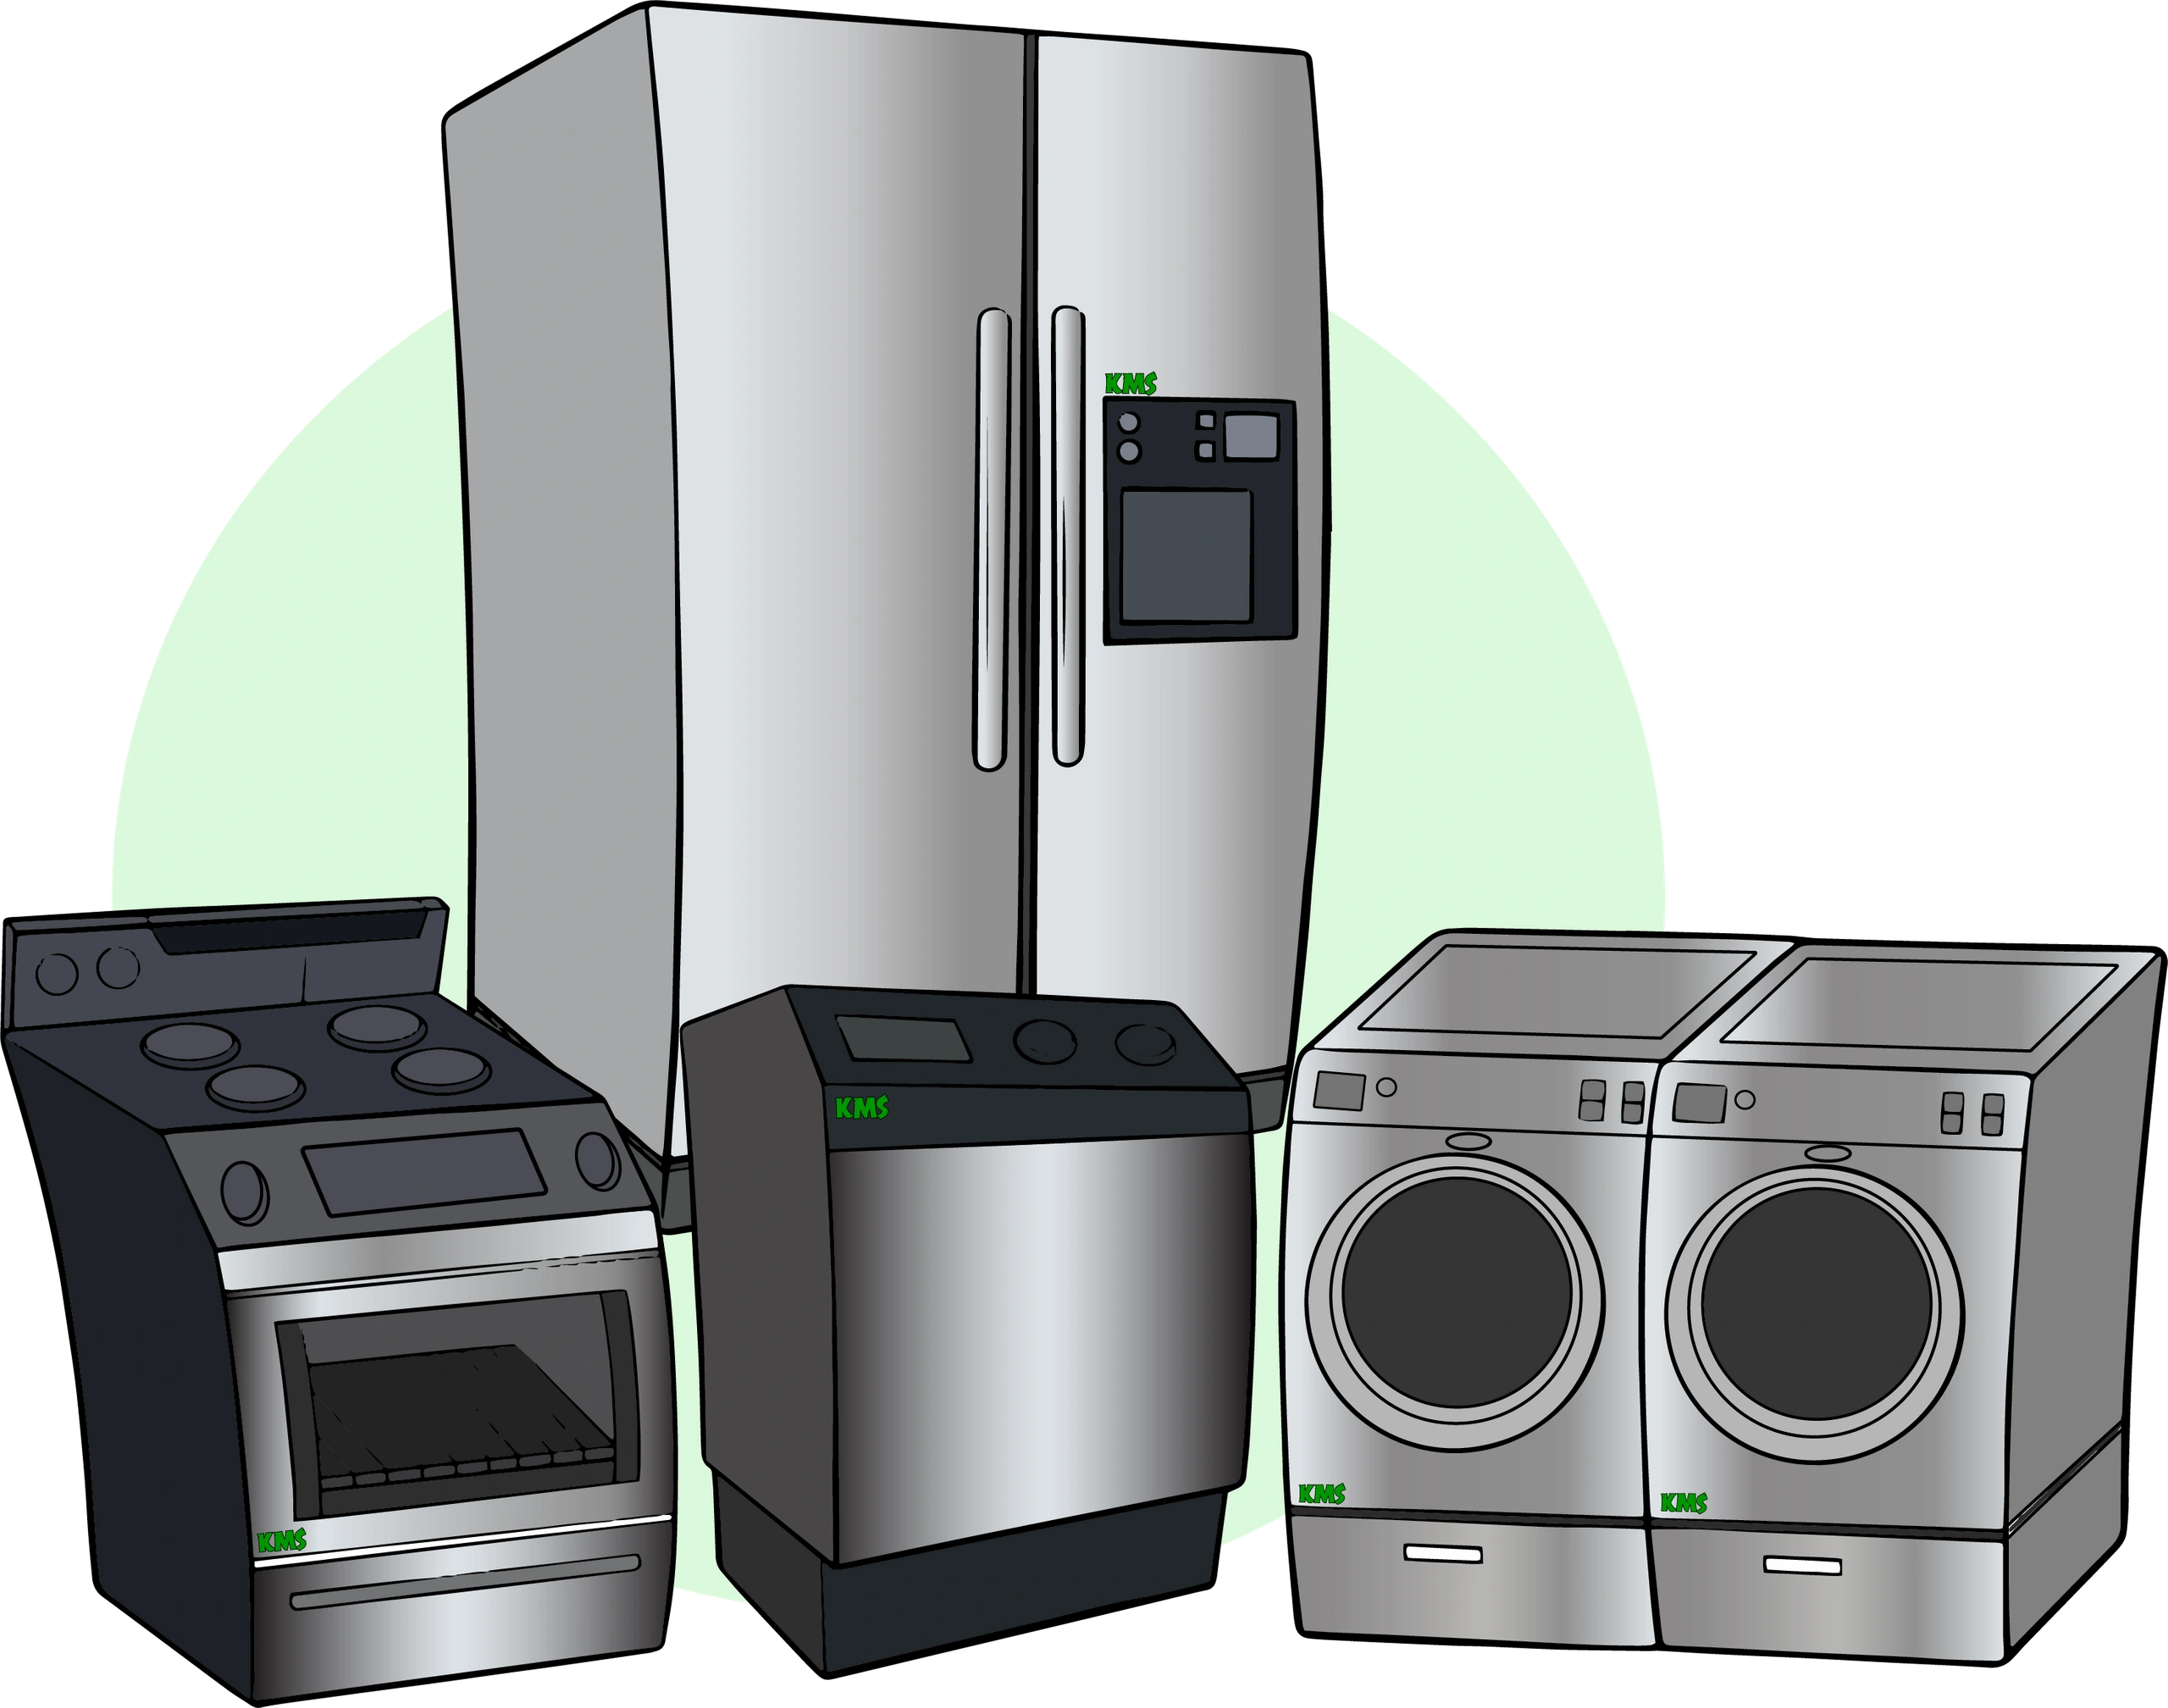 Frigidaire stove,oven repair,Frigidaire parts,Montreal, Laval, West Island,North Shore ,South Shore.